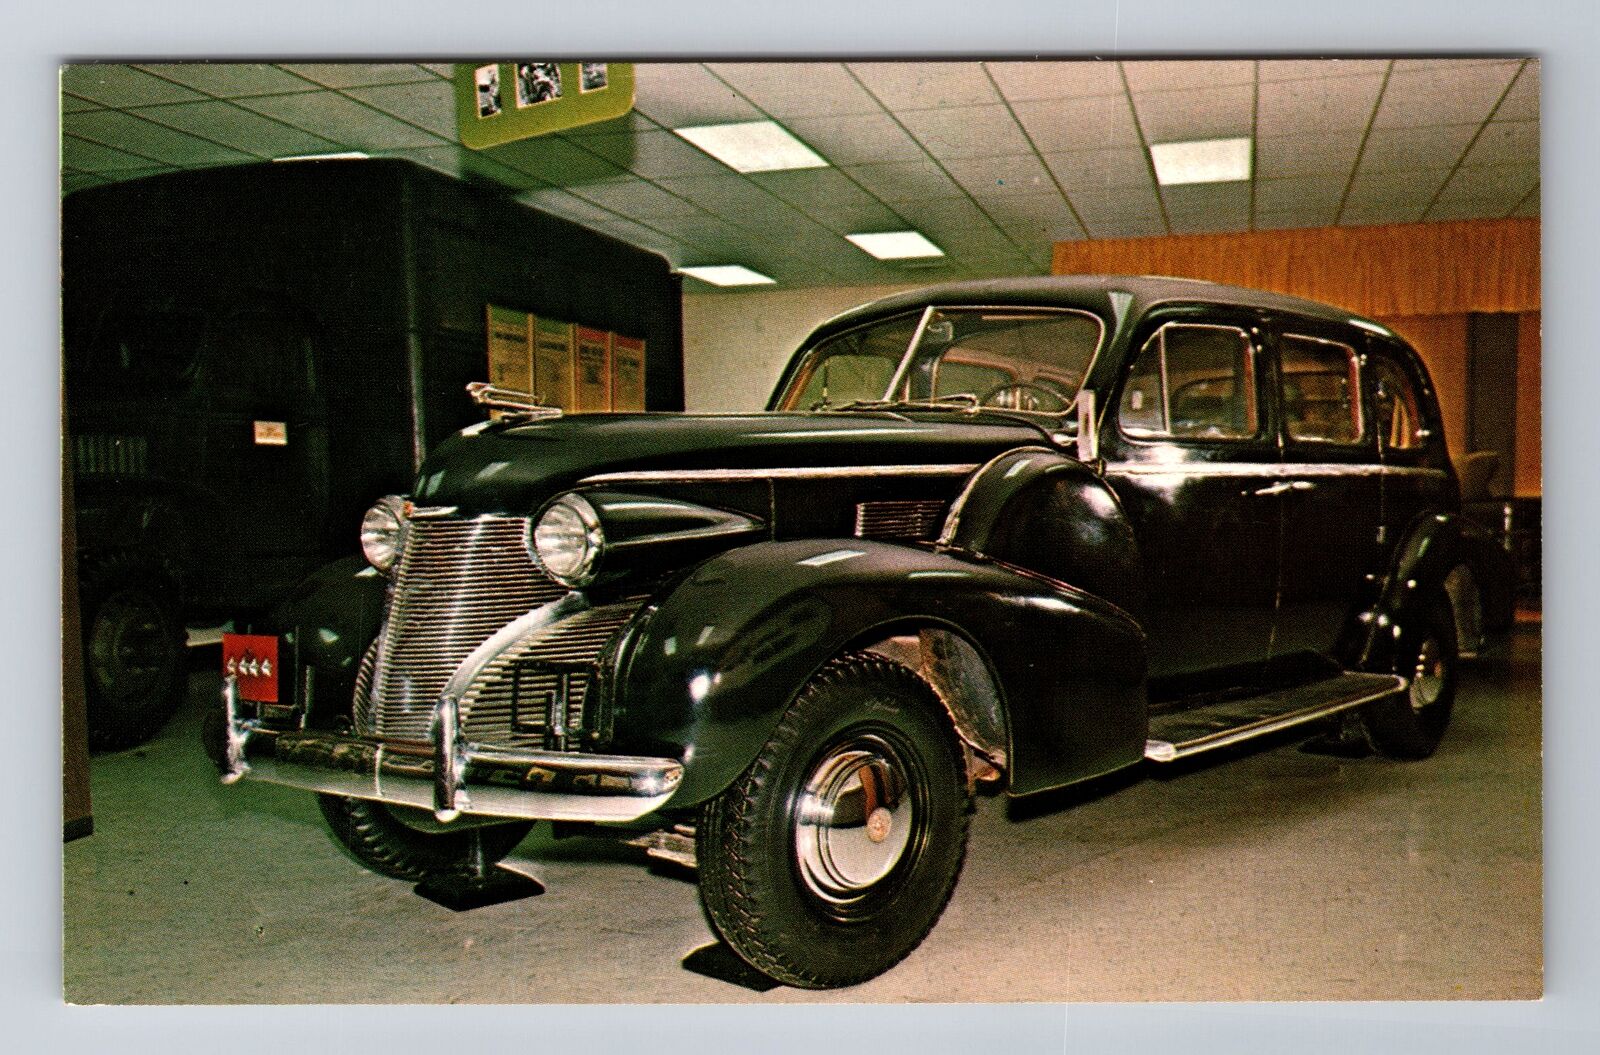 Fort Knox KY-Kentucky, 1939 Cadillac, Patton Museum, Antique, Vintage Postcard